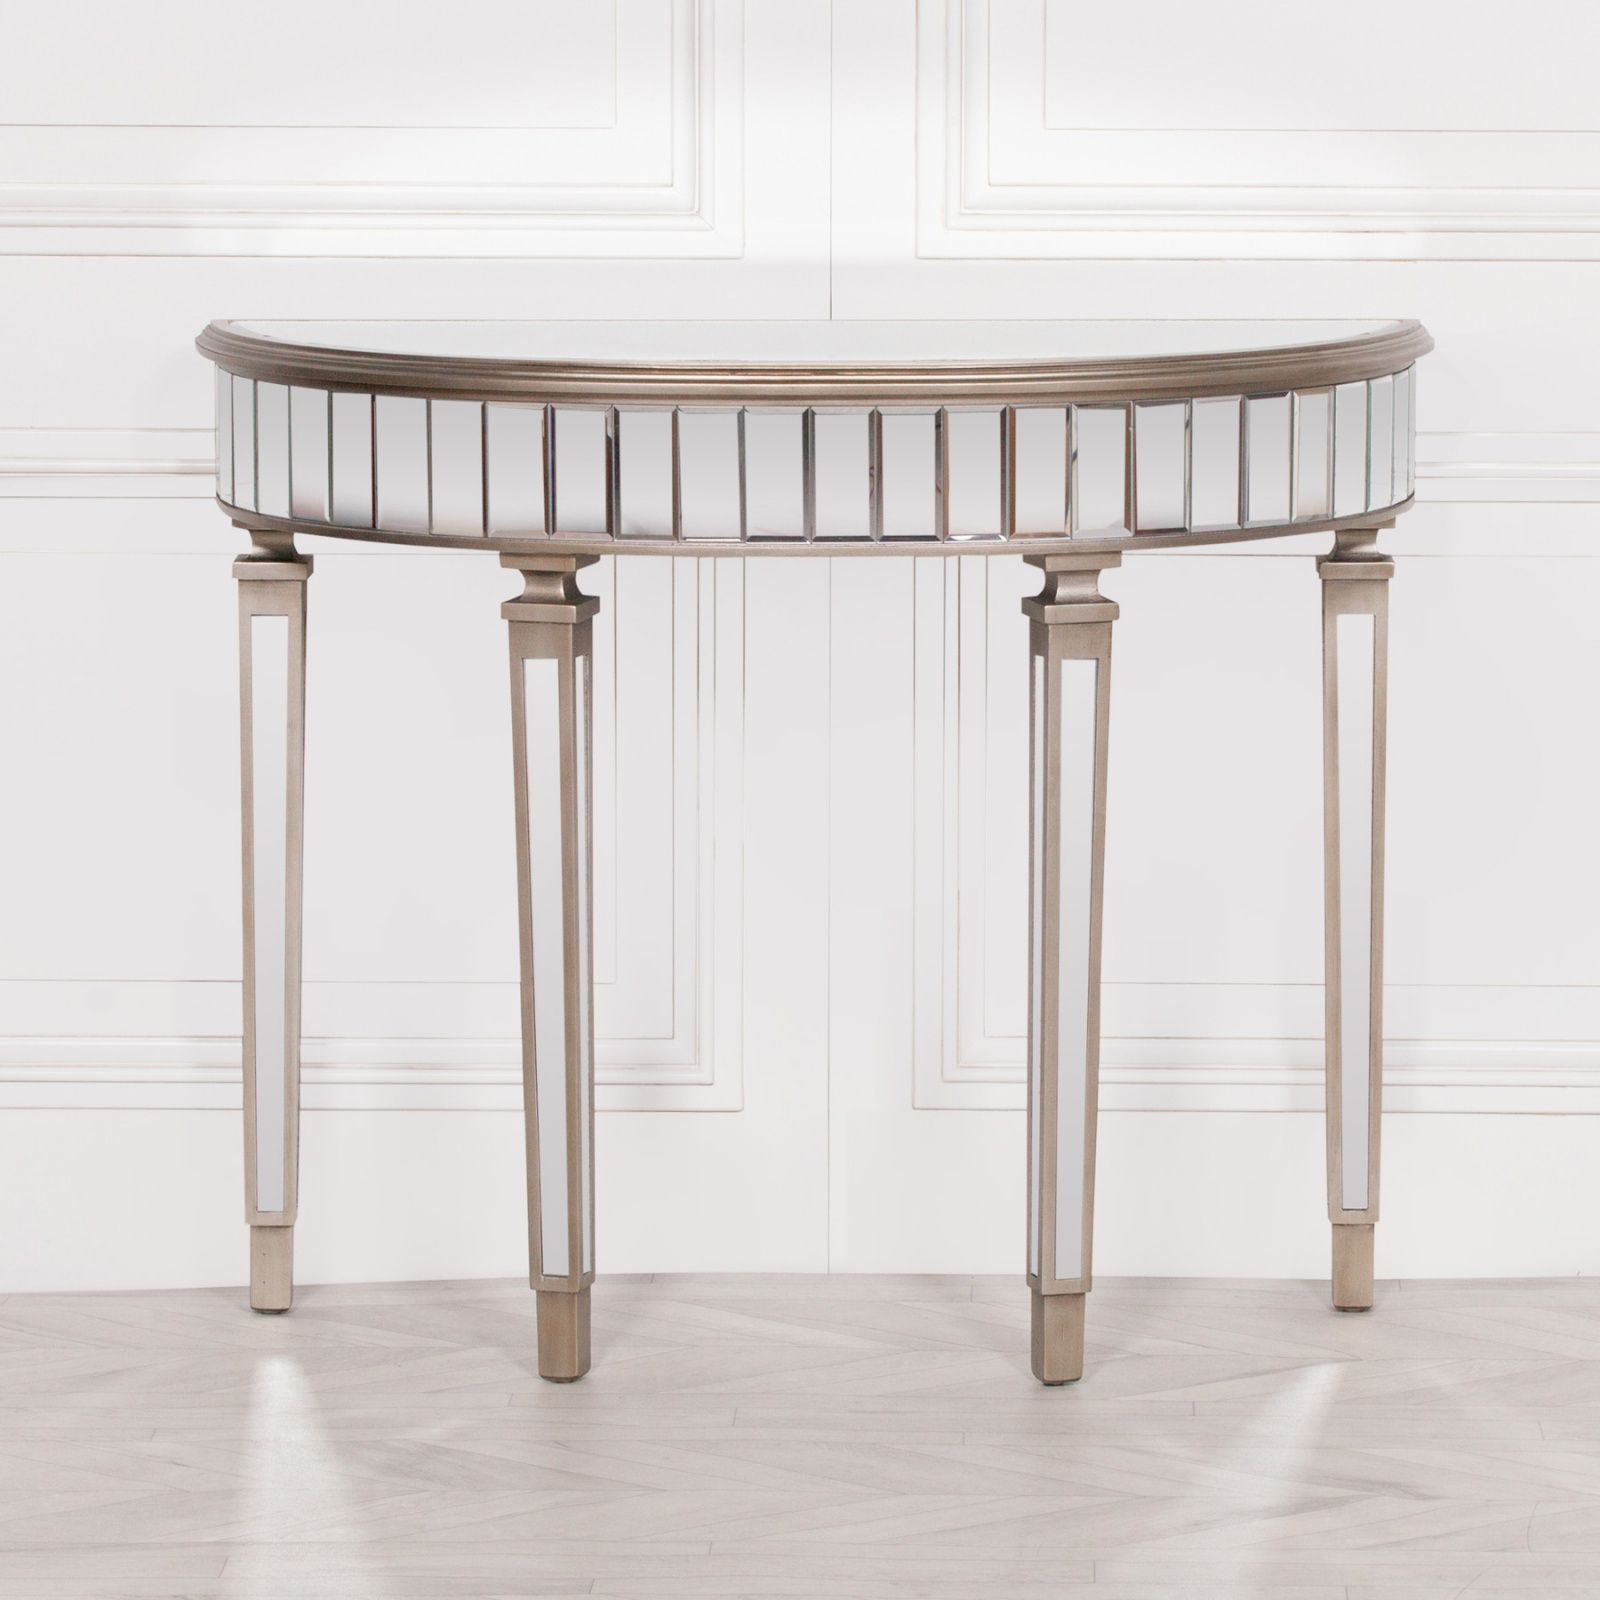 Venetian Hall Demilune Mirrored Silver Console Table In Silver Console Tables (View 8 of 20)